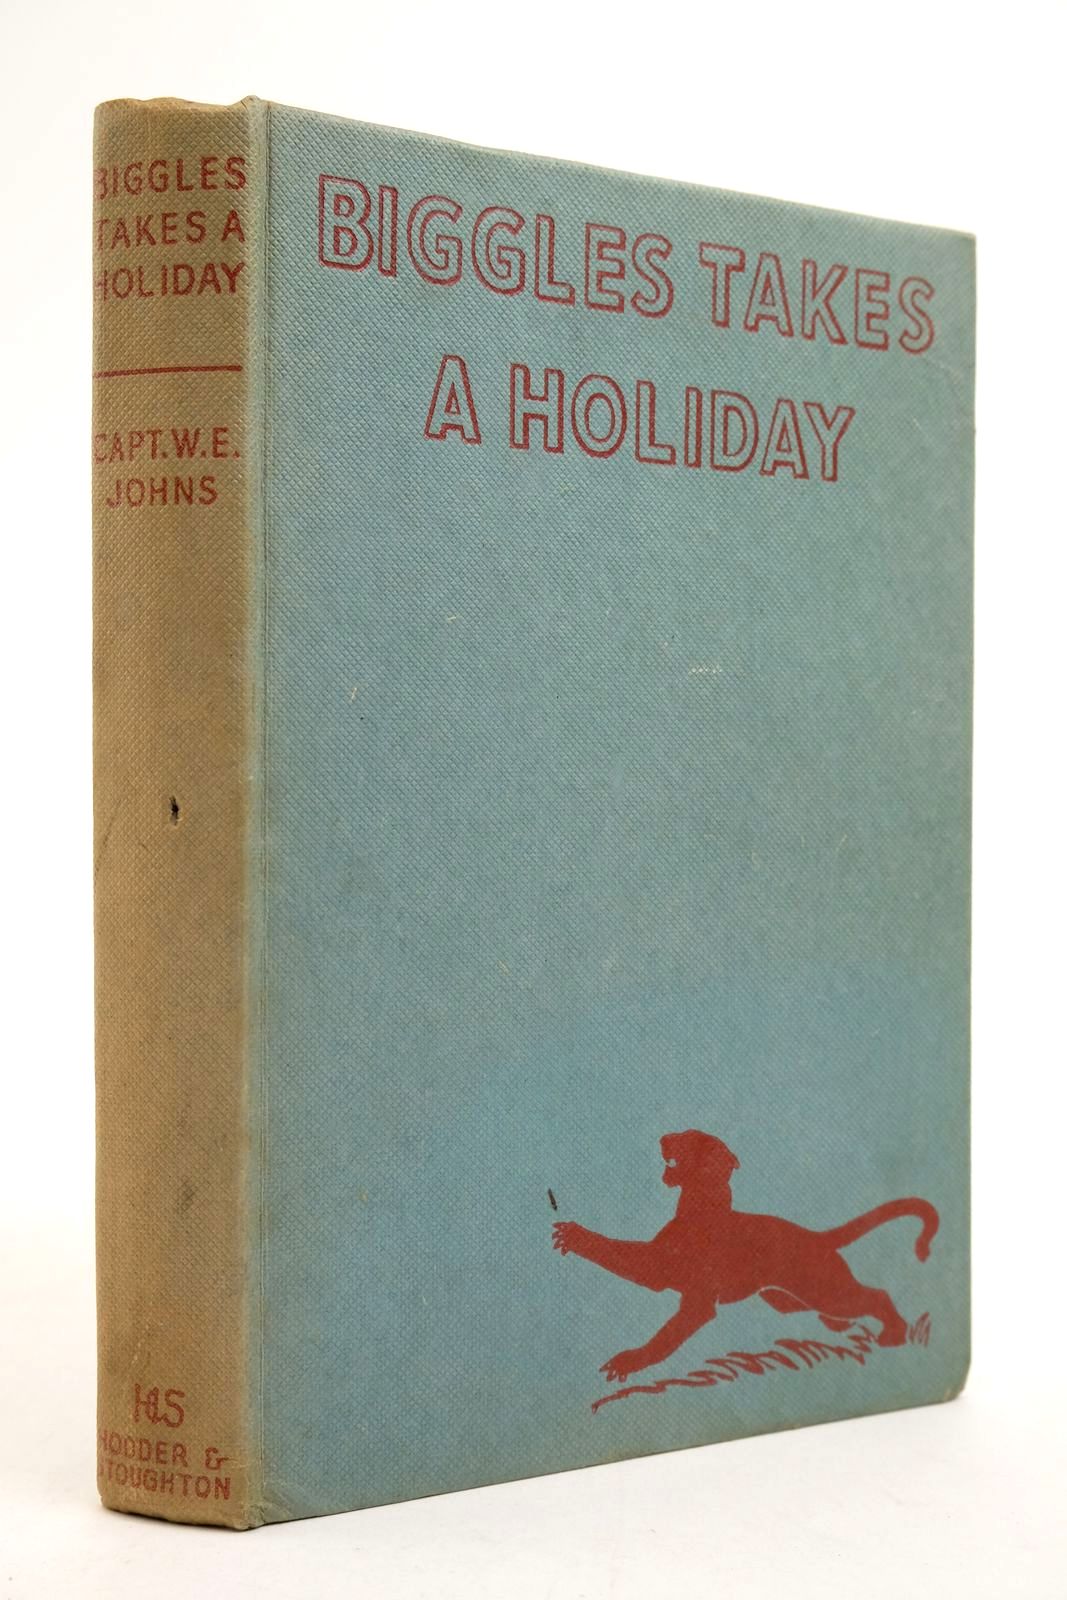 Photo of BIGGLES TAKES A HOLIDAY written by Johns, W.E. illustrated by Stead,  published by Hodder &amp; Stoughton (STOCK CODE: 2139680)  for sale by Stella & Rose's Books